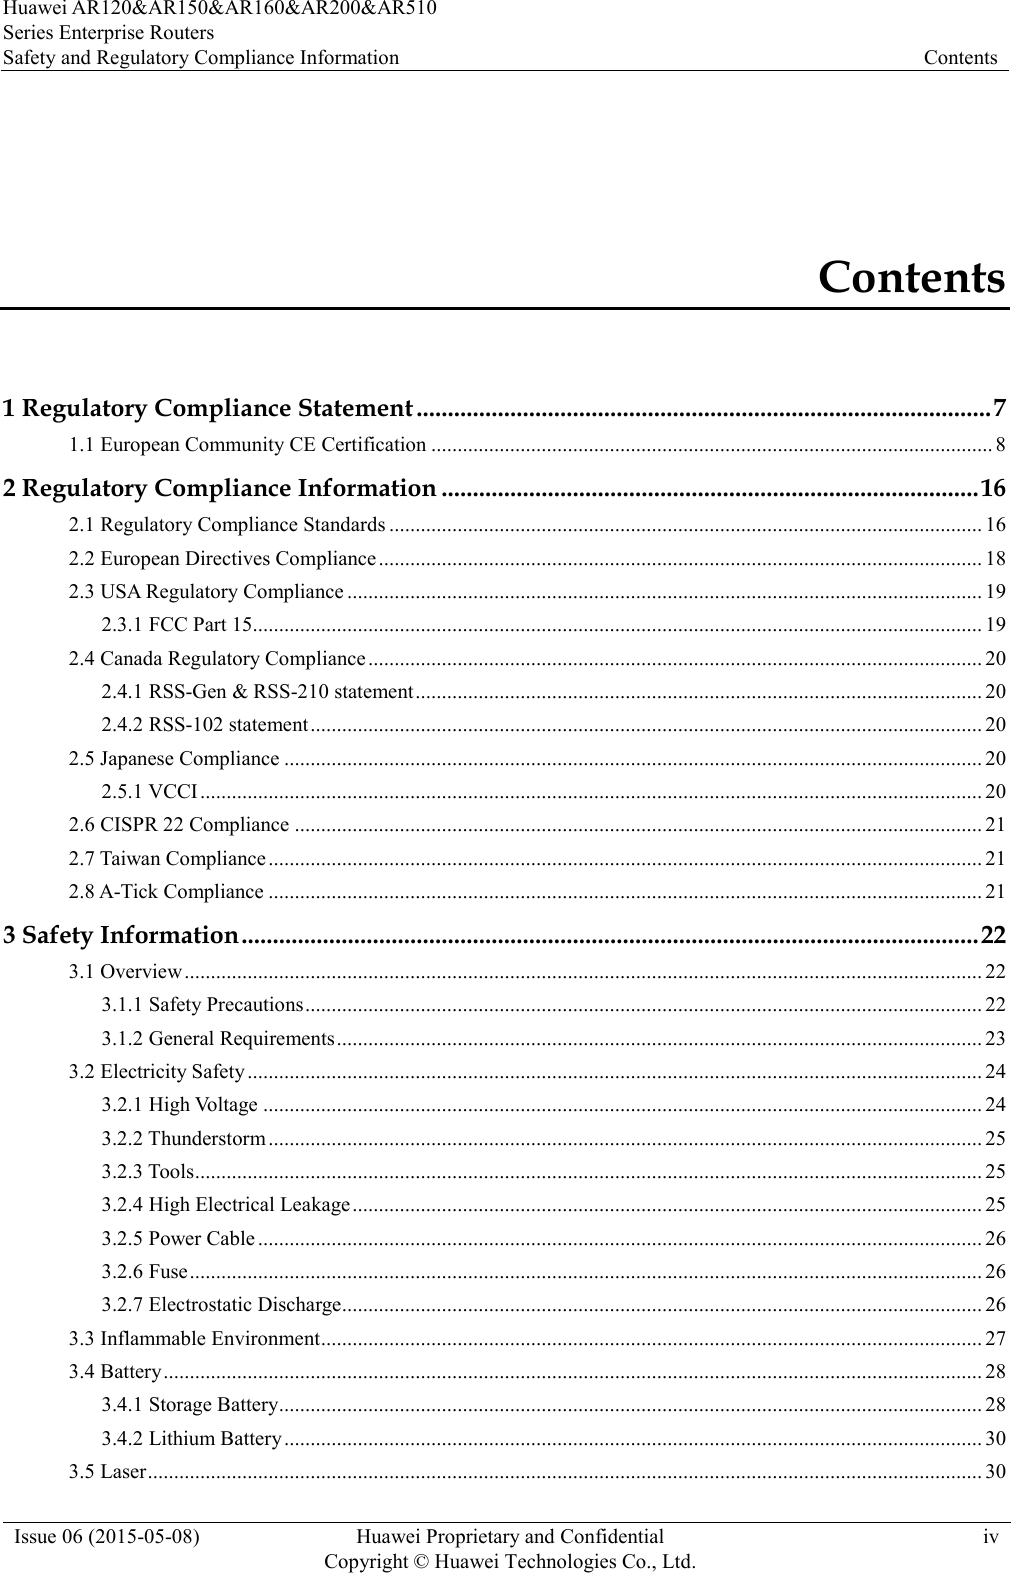 Huawei AR120&amp;AR150&amp;AR160&amp;AR200&amp;AR510 Series Enterprise Routers Safety and Regulatory Compliance Information Contents  Issue 06 (2015-05-08) Huawei Proprietary and Confidential           Copyright © Huawei Technologies Co., Ltd. iv  Contents 1 Regulatory Compliance Statement ............................................................................................ 7 1.1 European Community CE Certification ........................................................................................................... 8 2 Regulatory Compliance Information ...................................................................................... 16 2.1 Regulatory Compliance Standards ................................................................................................................. 16 2.2 European Directives Compliance ................................................................................................................... 18 2.3 USA Regulatory Compliance ......................................................................................................................... 19 2.3.1 FCC Part 15........................................................................................................................................... 19 2.4 Canada Regulatory Compliance ..................................................................................................................... 20 2.4.1 RSS-Gen &amp; RSS-210 statement ............................................................................................................ 20 2.4.2 RSS-102 statement ................................................................................................................................ 20 2.5 Japanese Compliance ..................................................................................................................................... 20 2.5.1 VCCI ..................................................................................................................................................... 20 2.6 CISPR 22 Compliance ................................................................................................................................... 21 2.7 Taiwan Compliance ........................................................................................................................................ 21 2.8 A-Tick Compliance ........................................................................................................................................ 21 3 Safety Information ...................................................................................................................... 22 3.1 Overview ........................................................................................................................................................ 22 3.1.1 Safety Precautions ................................................................................................................................. 22 3.1.2 General Requirements ........................................................................................................................... 23 3.2 Electricity Safety ............................................................................................................................................ 24 3.2.1 High Voltage ......................................................................................................................................... 24 3.2.2 Thunderstorm ........................................................................................................................................ 25 3.2.3 Tools ...................................................................................................................................................... 25 3.2.4 High Electrical Leakage ........................................................................................................................ 25 3.2.5 Power Cable .......................................................................................................................................... 26 3.2.6 Fuse ....................................................................................................................................................... 26 3.2.7 Electrostatic Discharge.......................................................................................................................... 26 3.3 Inflammable Environment .............................................................................................................................. 27 3.4 Battery ............................................................................................................................................................ 28 3.4.1 Storage Battery ...................................................................................................................................... 28 3.4.2 Lithium Battery ..................................................................................................................................... 30 3.5 Laser ............................................................................................................................................................... 30 